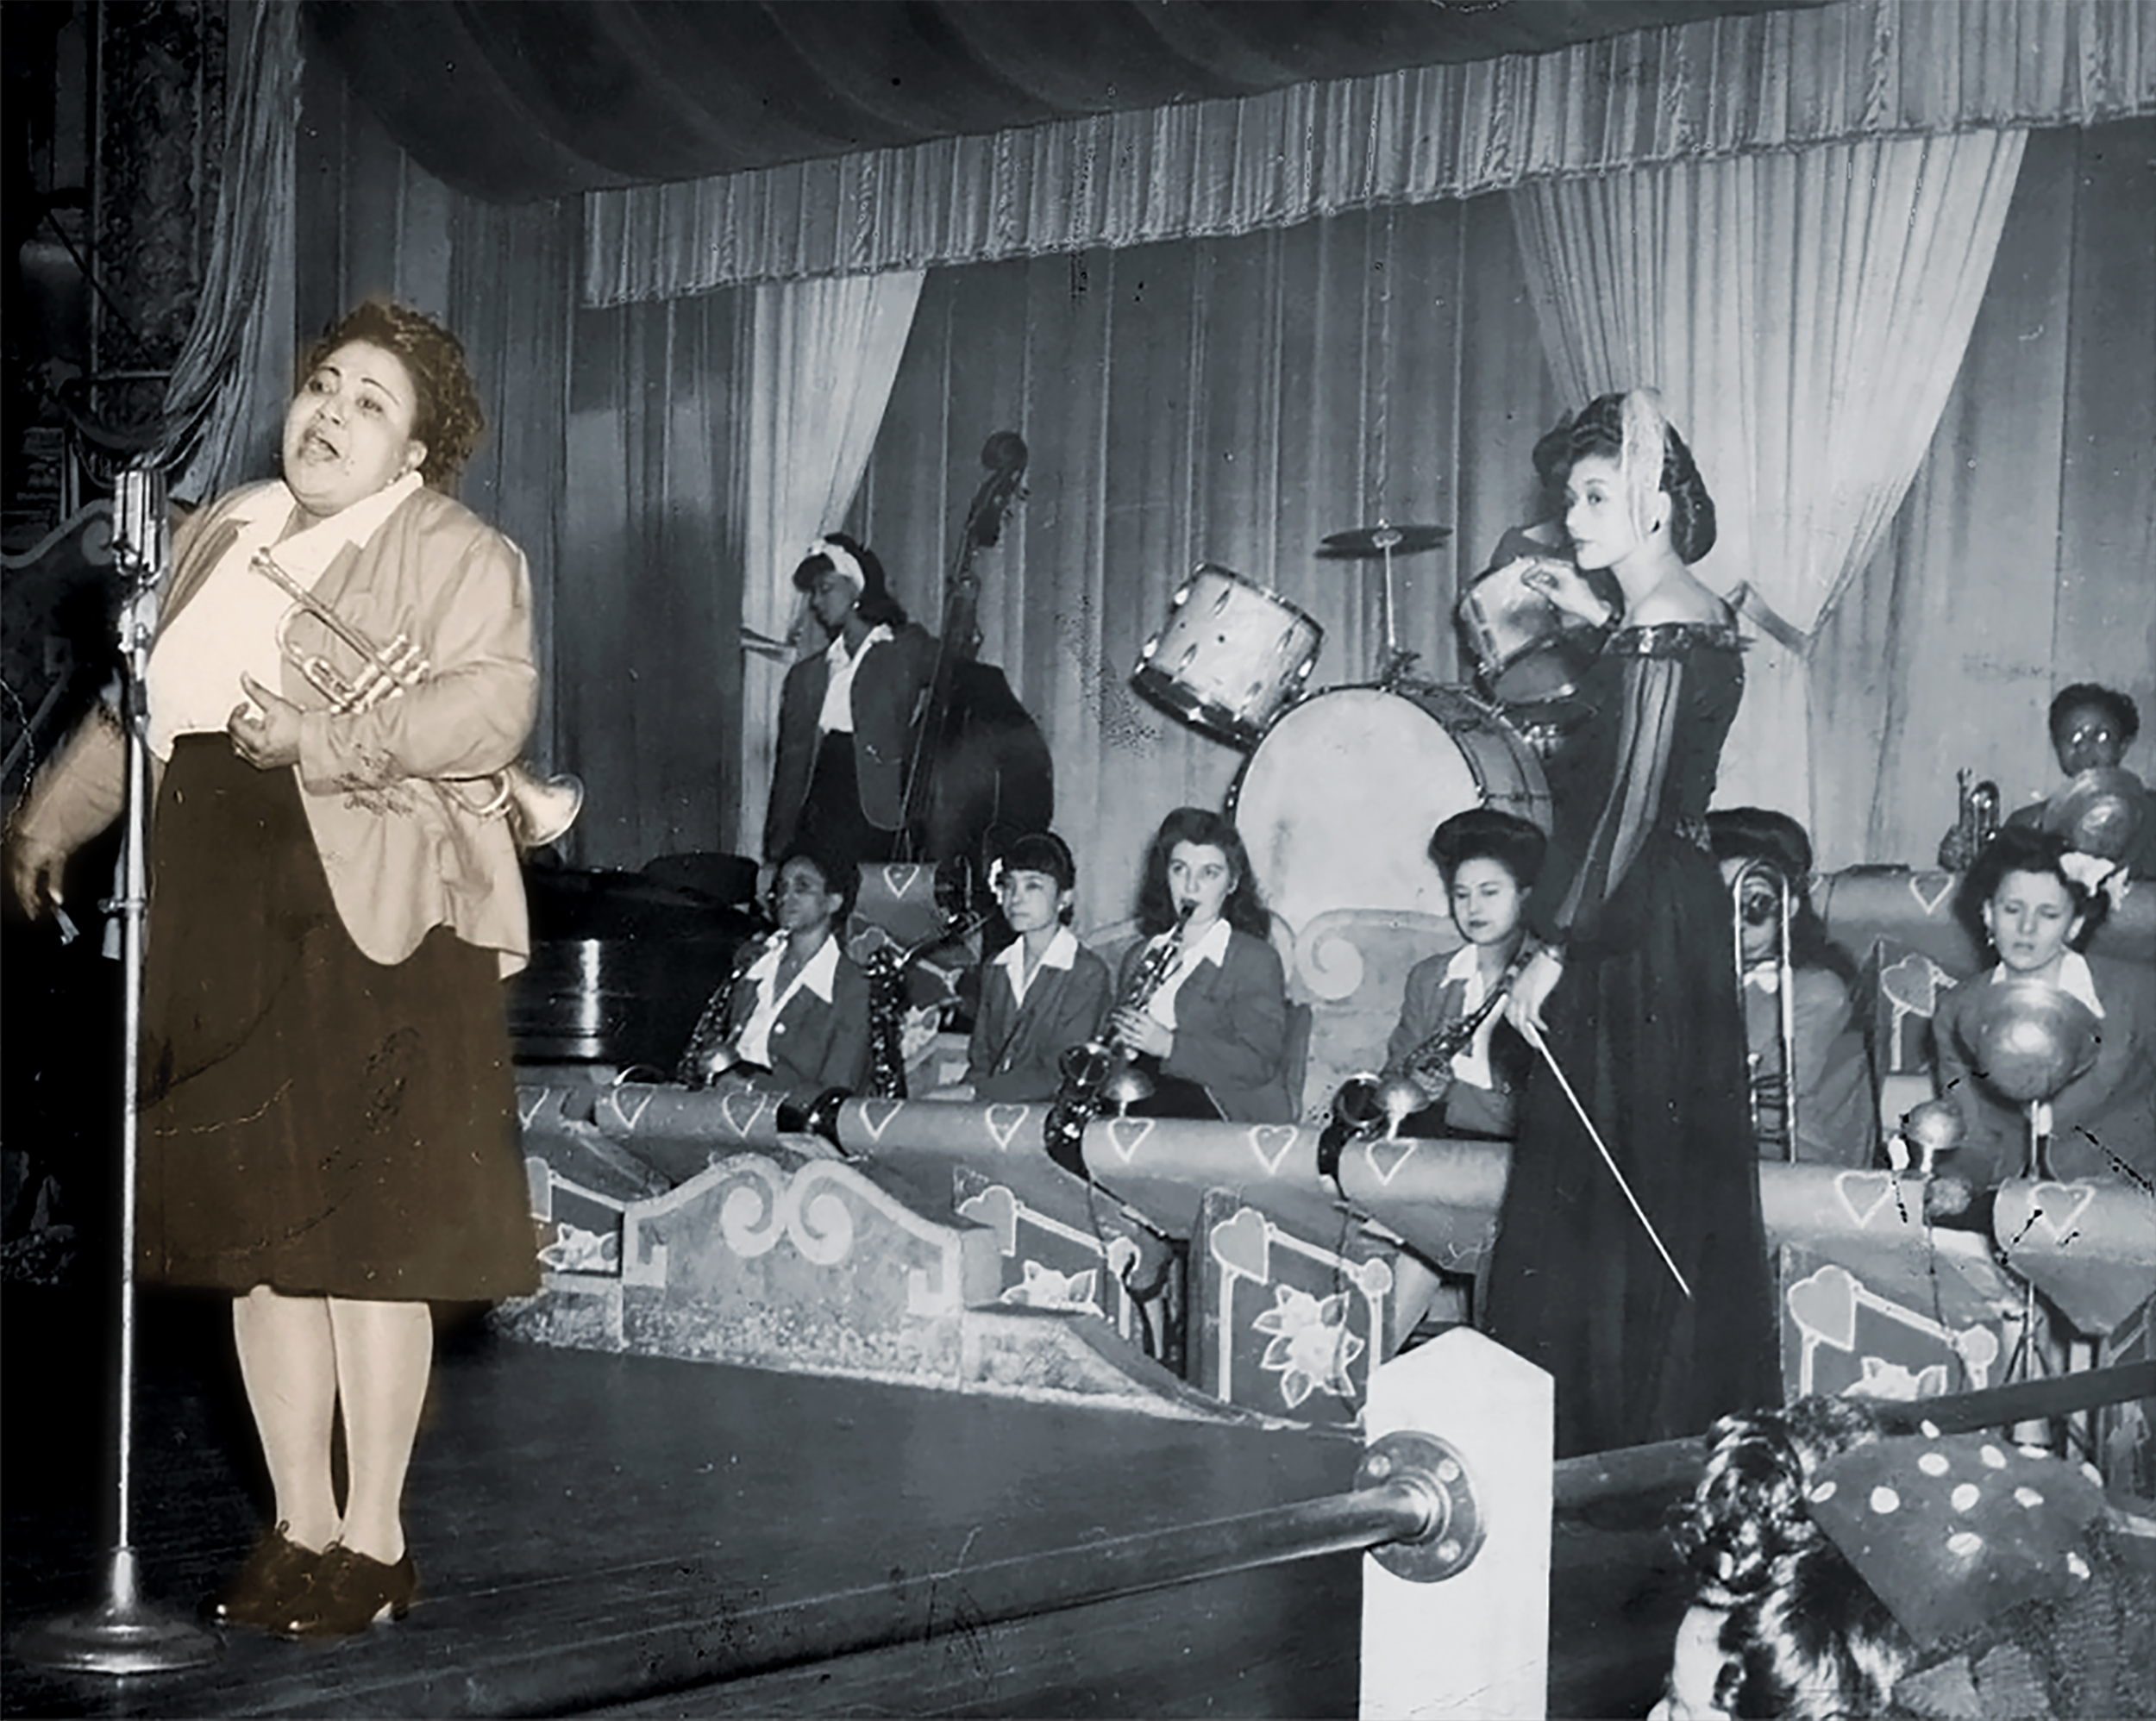 Archives Center NMAHInternational Sweethearts of Rhythm Collection 1218 Series 2: Rosalind Cron Materials Box 1 Folder 16 Performance of the "Sweethearts" in St. Louis in 1944. Band leader/vocalist, Anna Mae Winburn